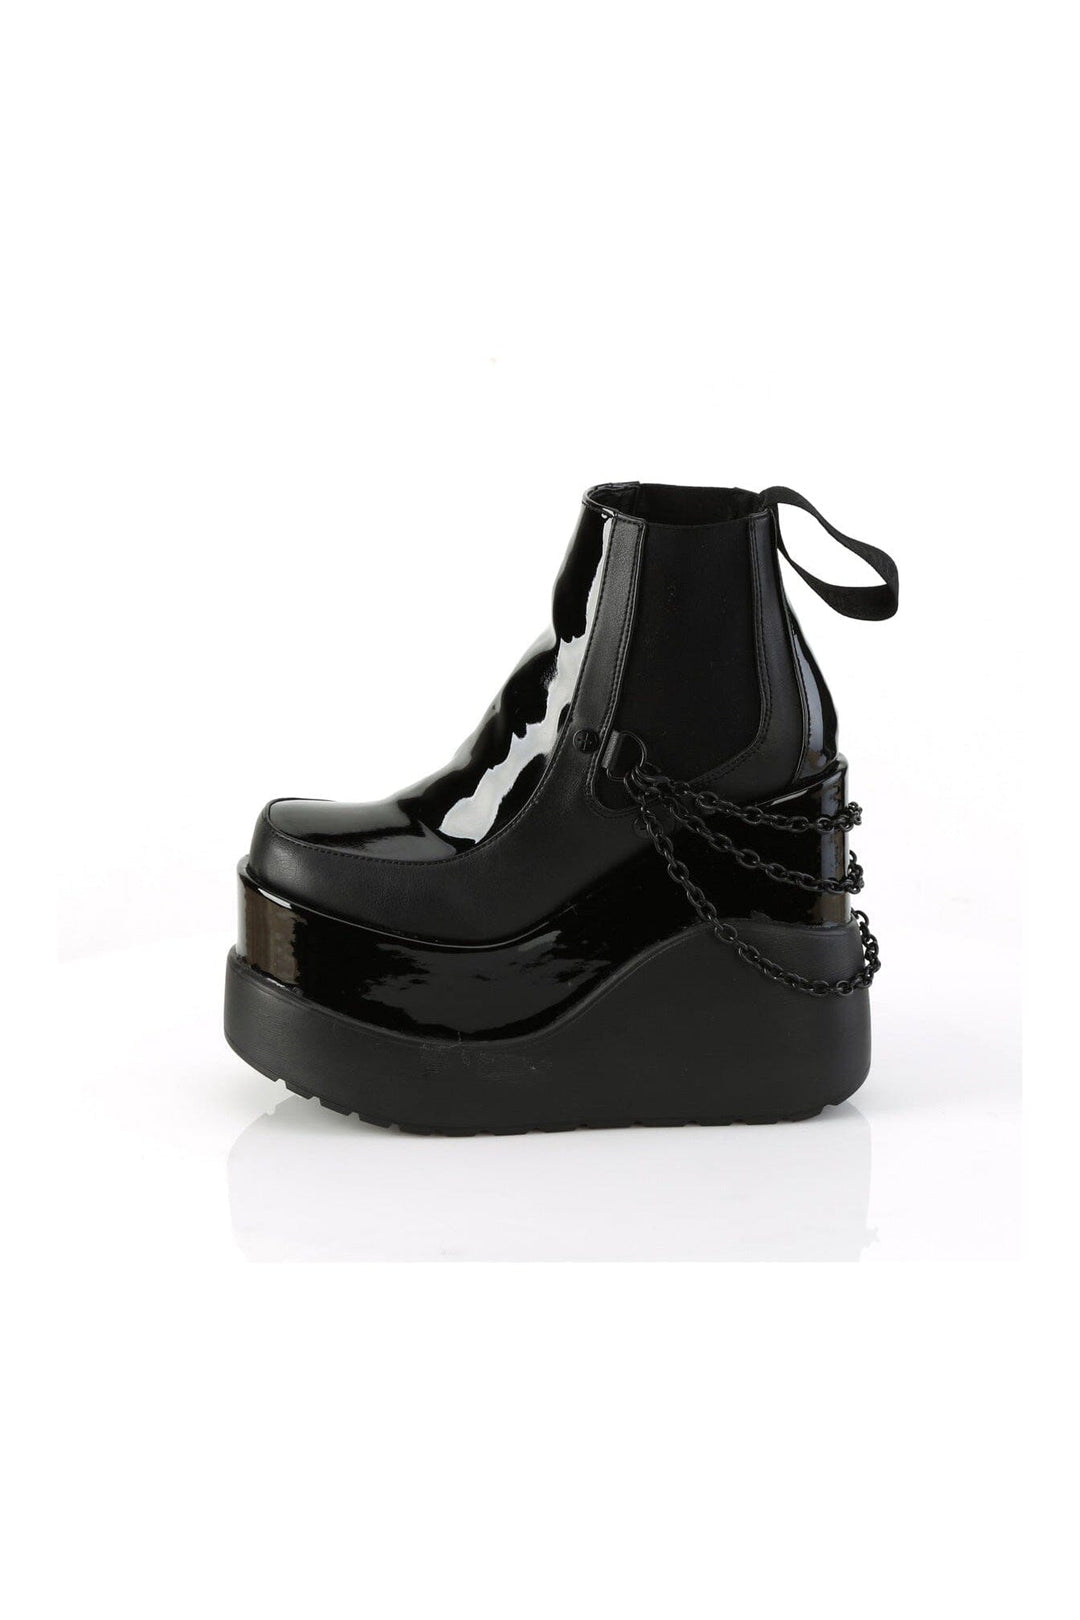 VOID-50 Black Patent Ankle Boot-Ankle Boots-Demonia-SEXYSHOES.COM